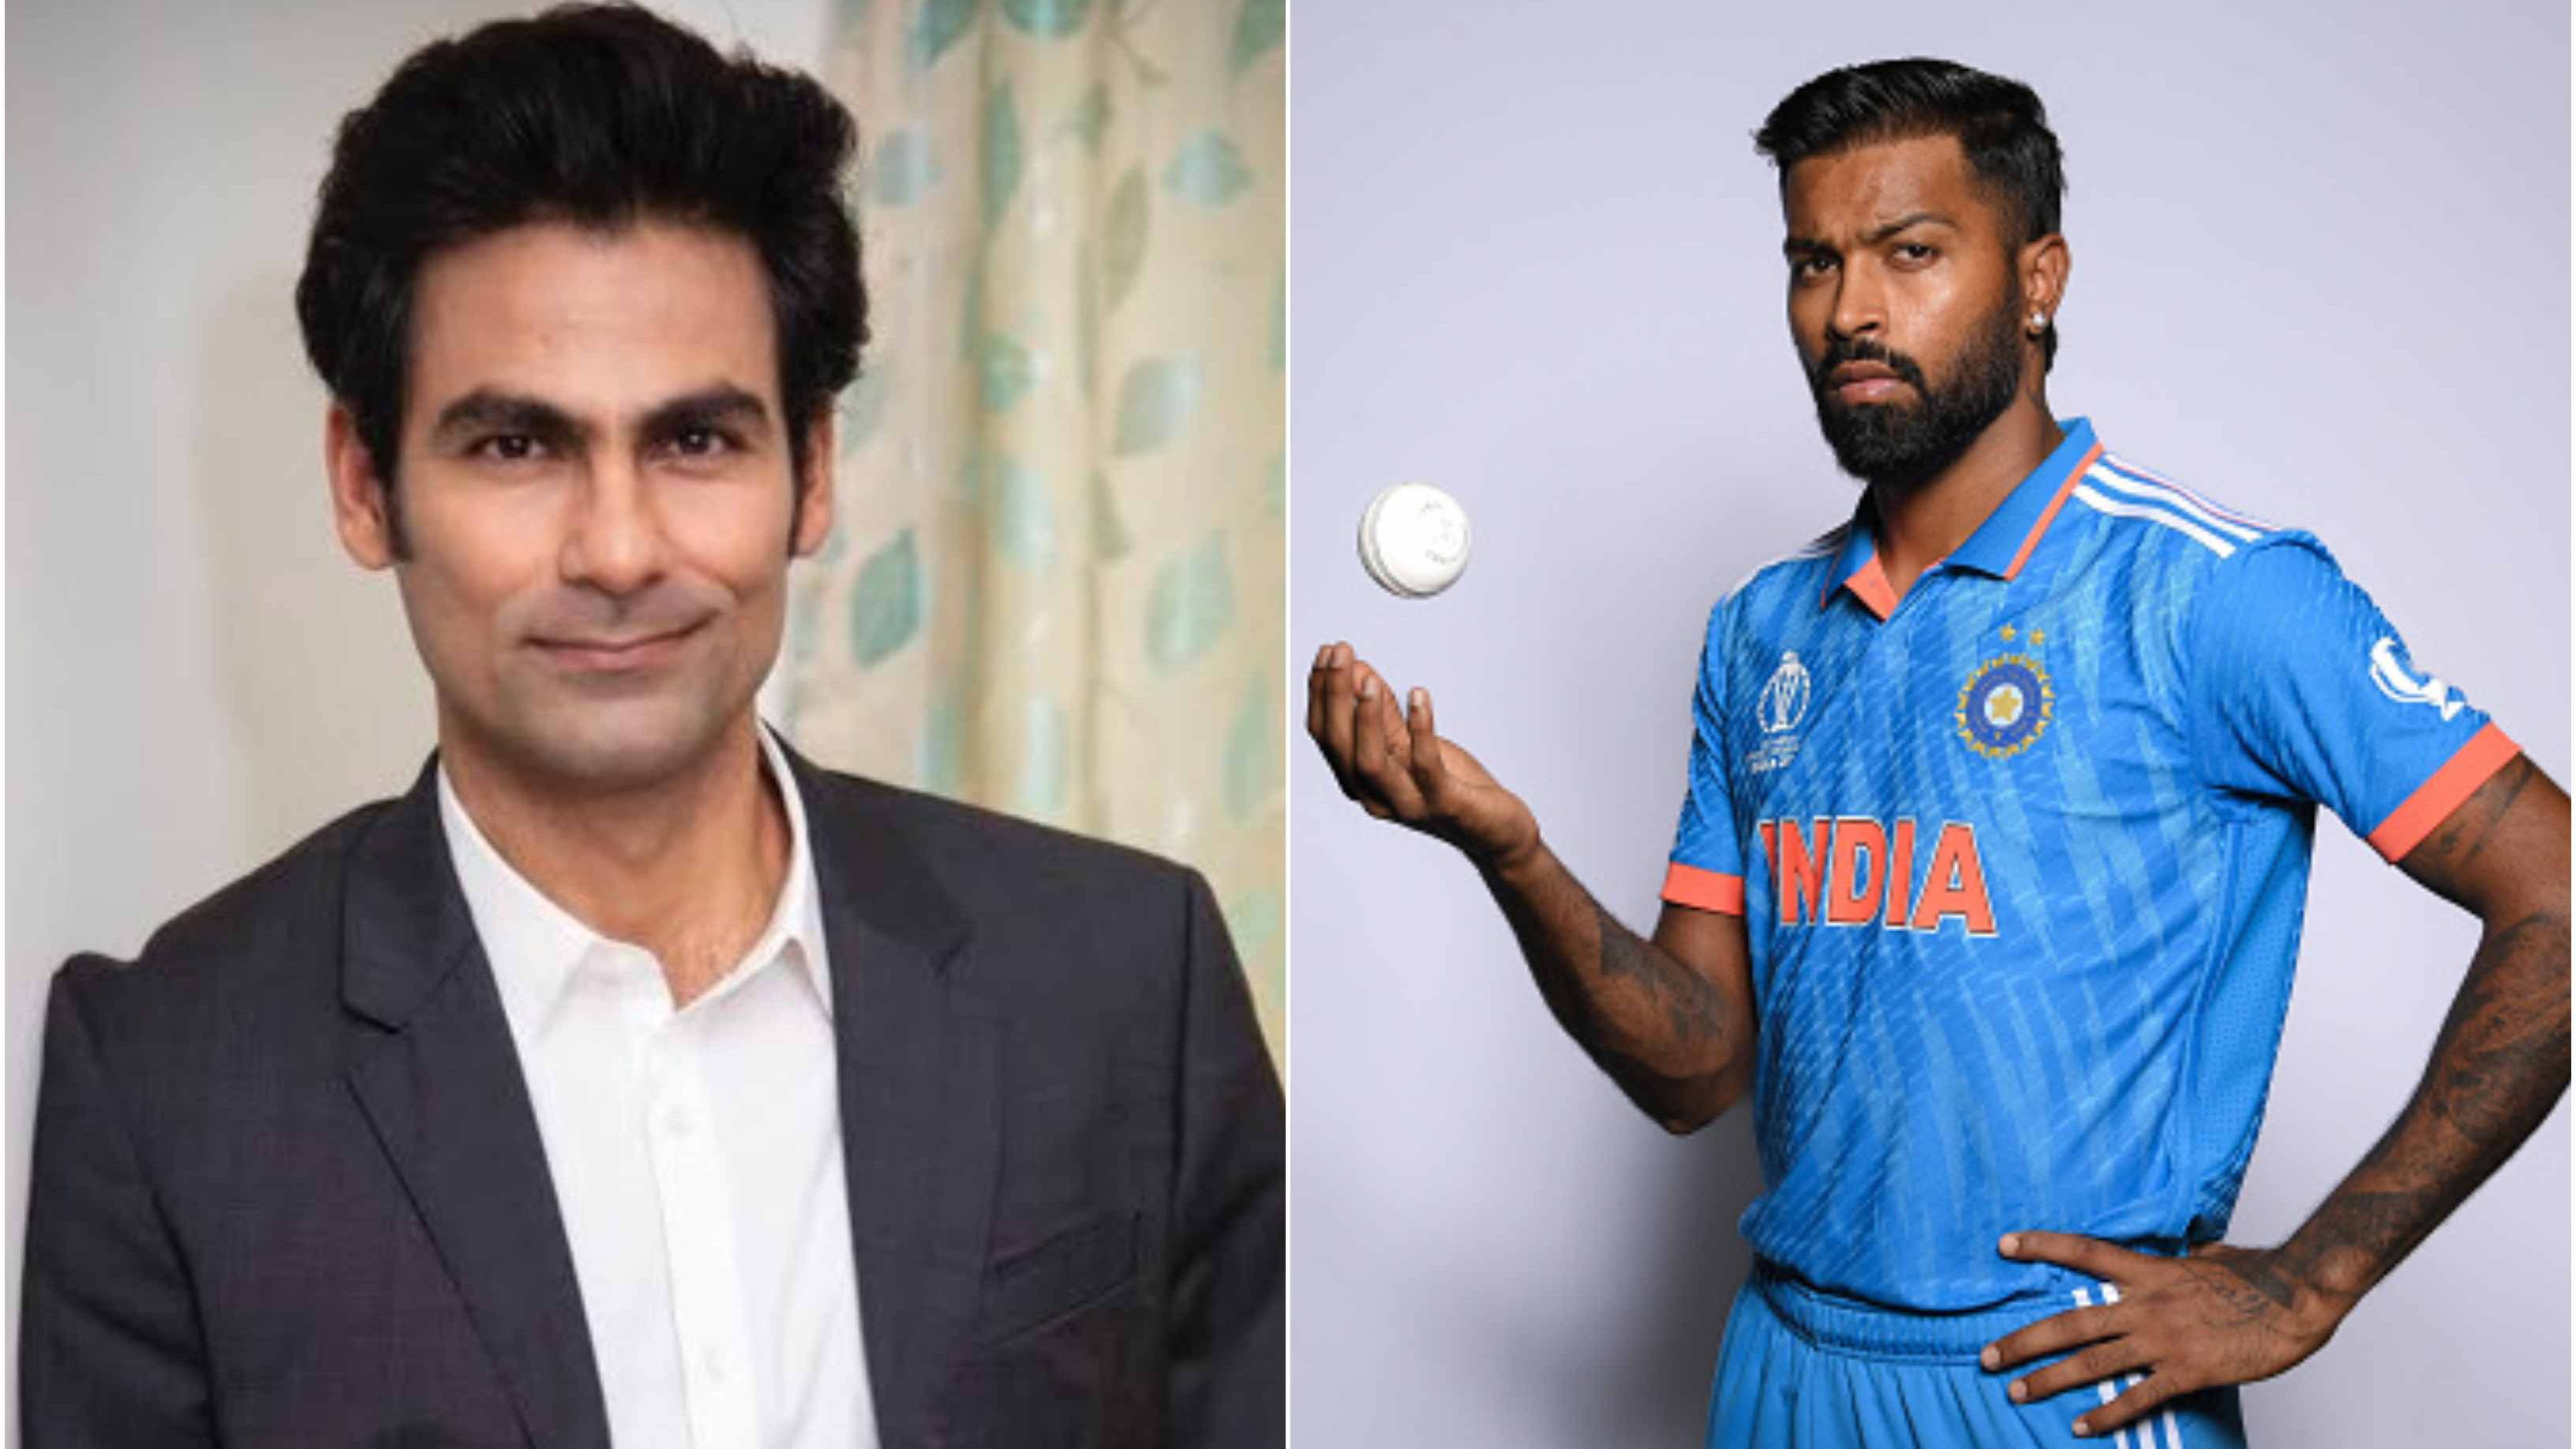 CWC 2023: Mohammad Kaif expects Hardik Pandya to play same role that Yuvraj Singh played in 2011 World Cup